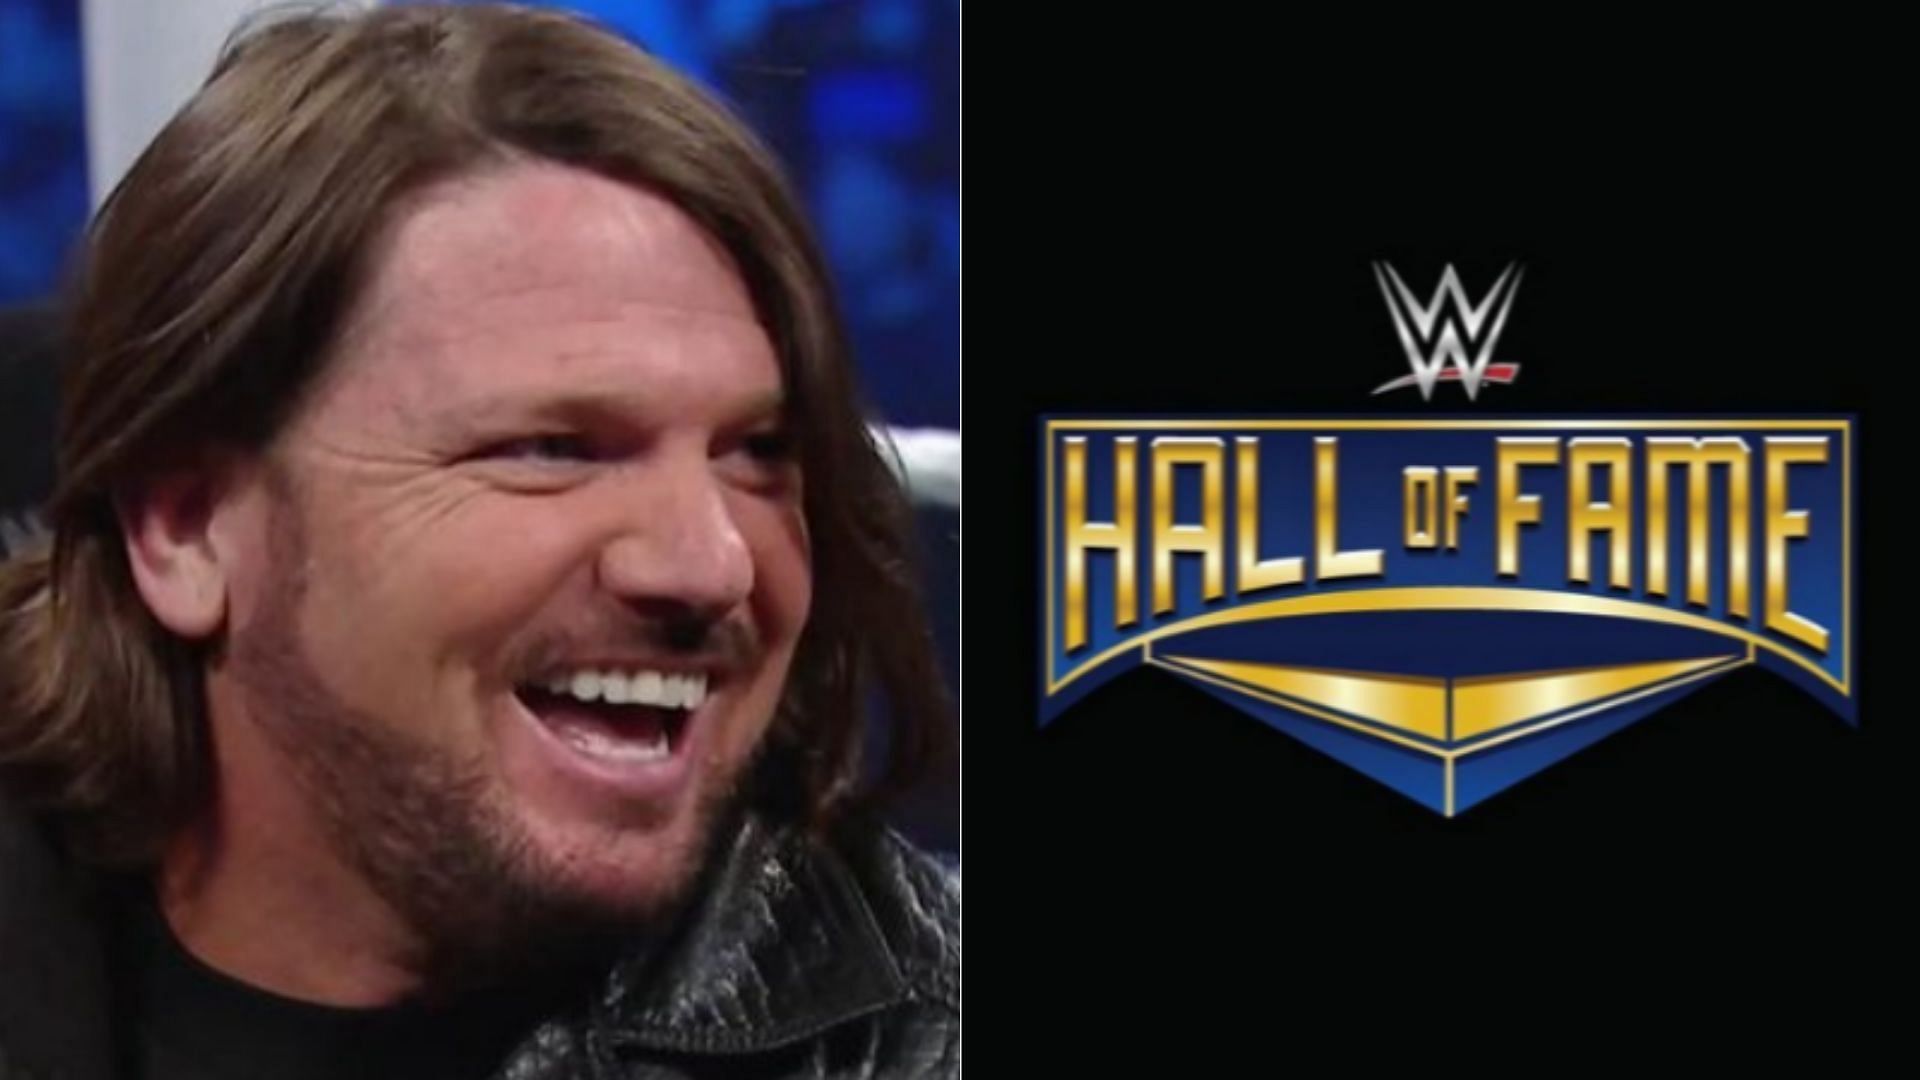 AJ Styles is one of WWE&#039;s top full-time superstars